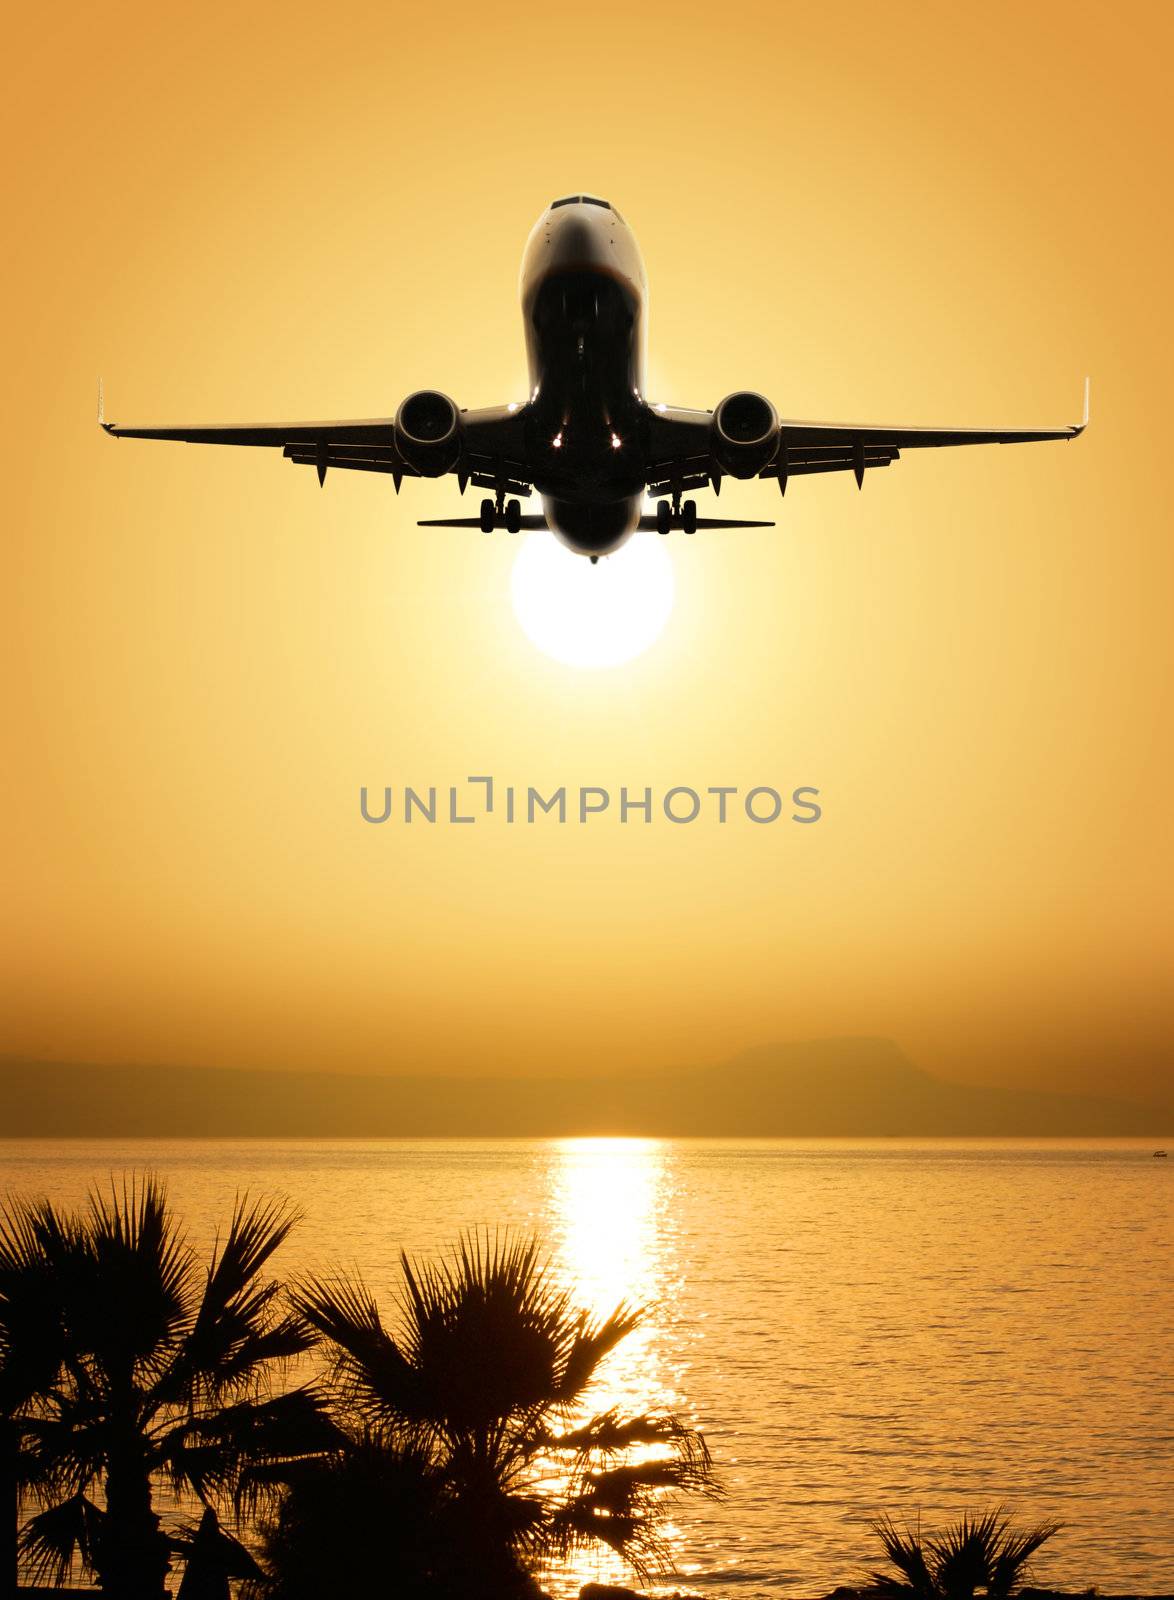 beautiful sea view and plane on sunset background